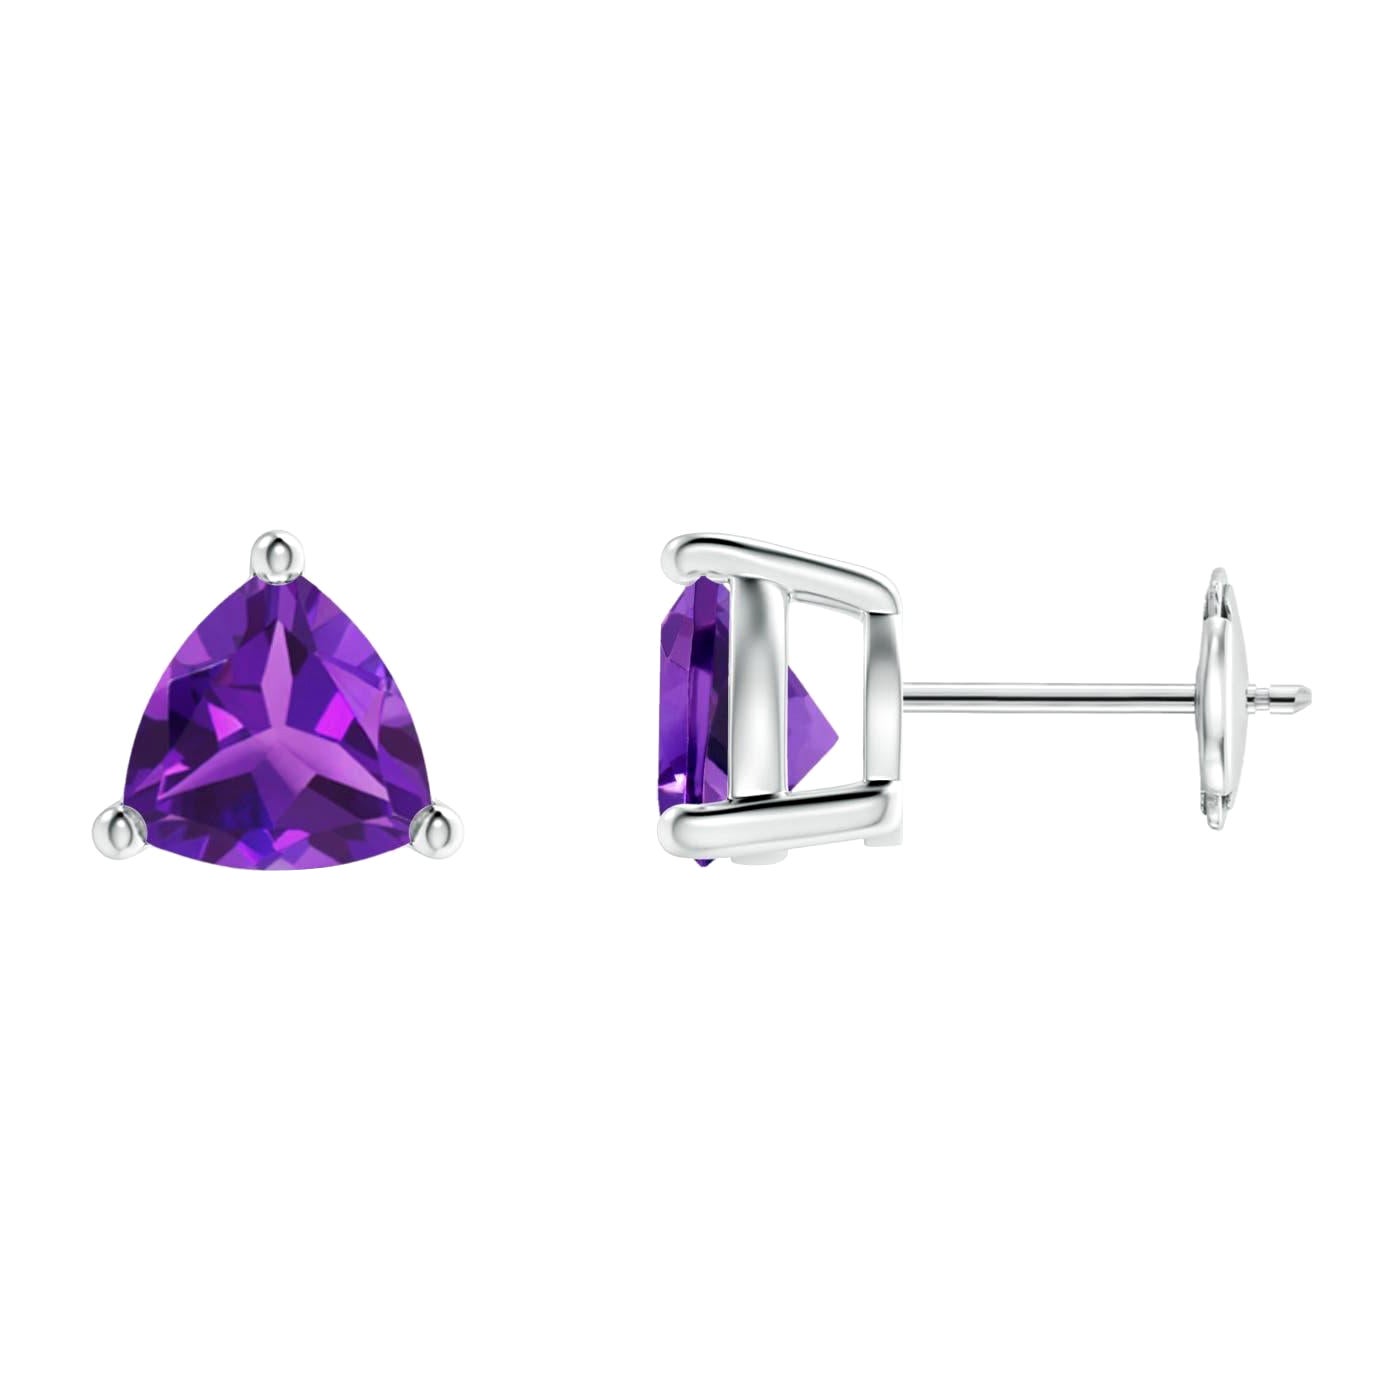 Natural Trillion 2.2ct Amethyst Stud Earrings in 14K White Gold